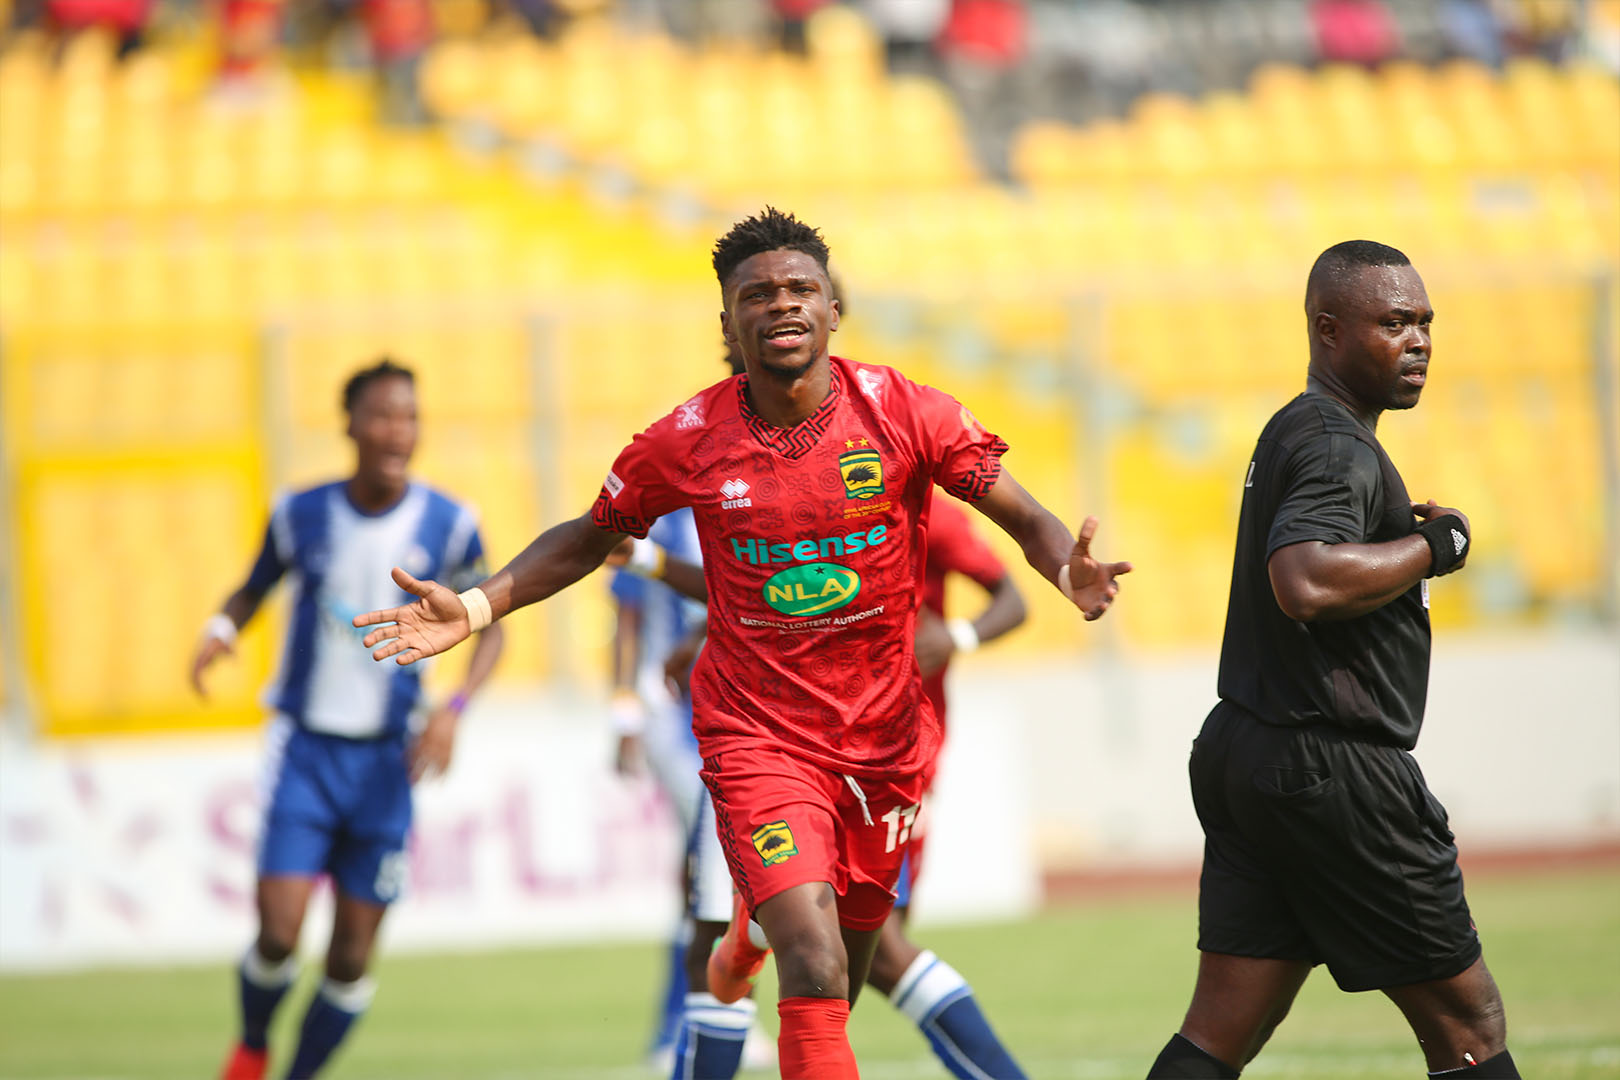 Watch GPL highlights as Frank Mbella double sees Kotoko overcome Olympics with ease